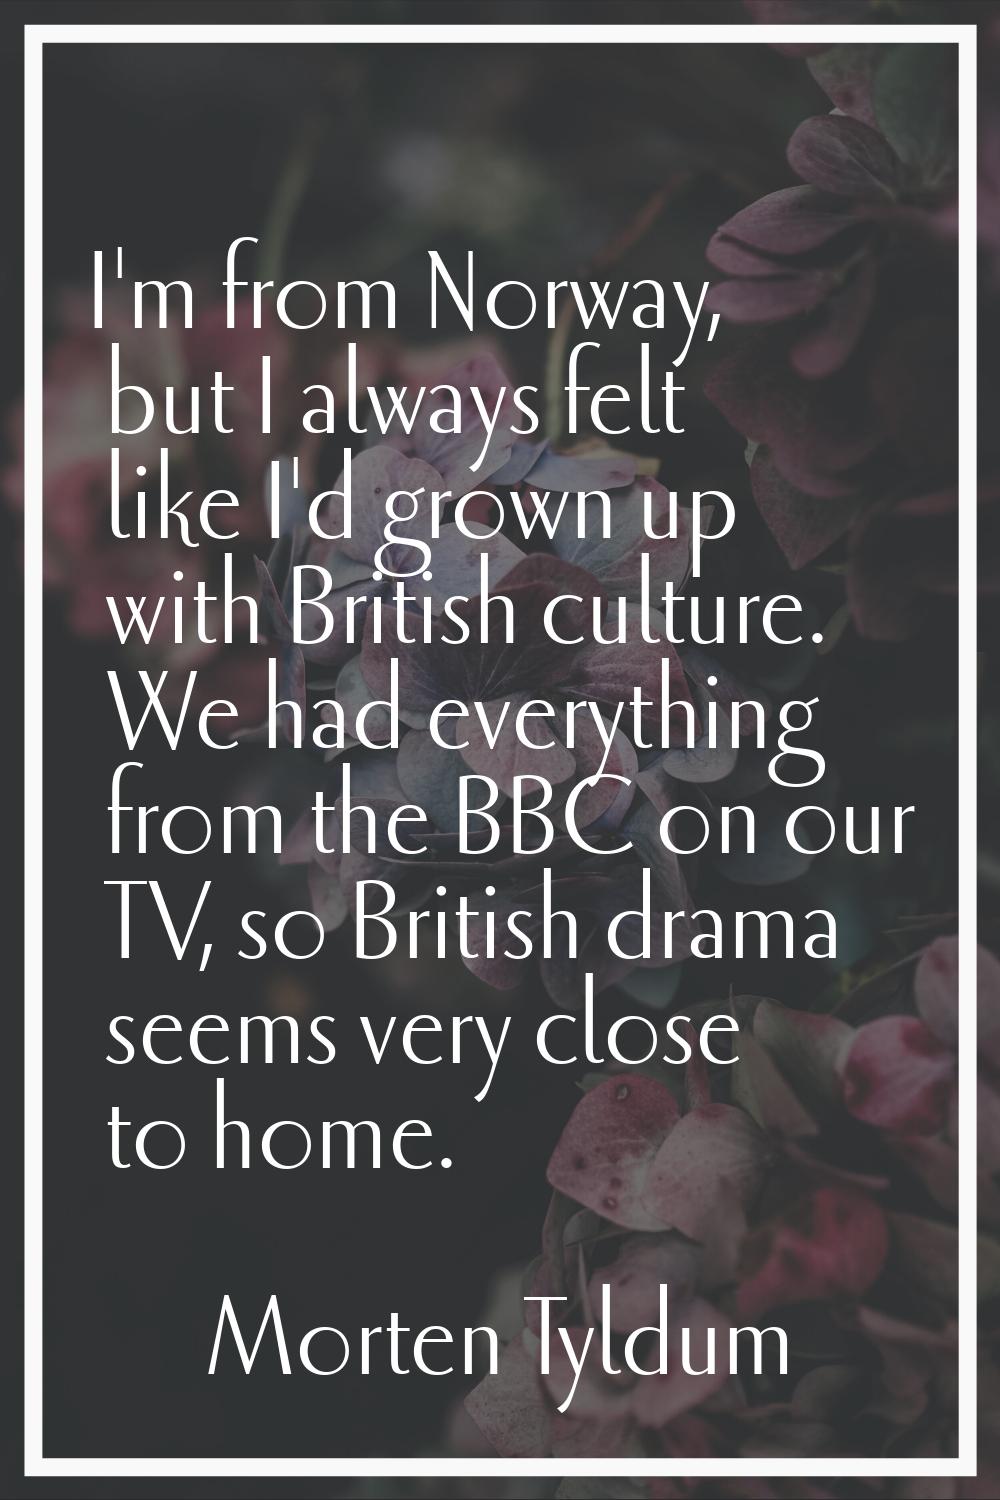 I'm from Norway, but I always felt like I'd grown up with British culture. We had everything from t